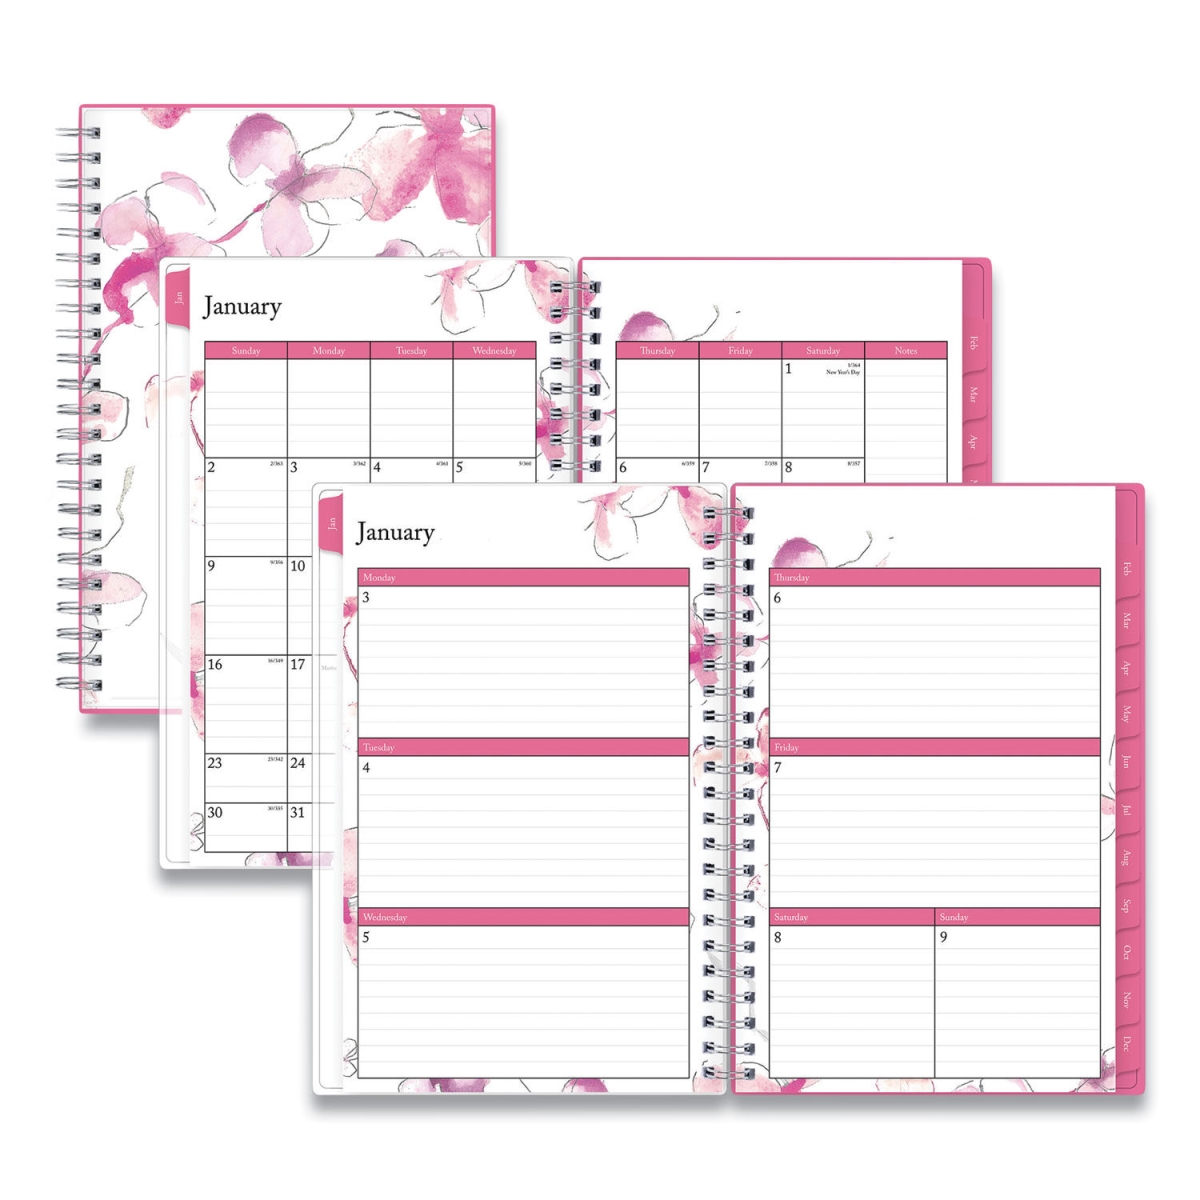 Blue Sky Herbal Inc Blue Sky 137270-22 8 x 5 in. Breast Cancer Awareness Create-Your-Own Cover Weekly & Monthly Planner Orchid Artwork